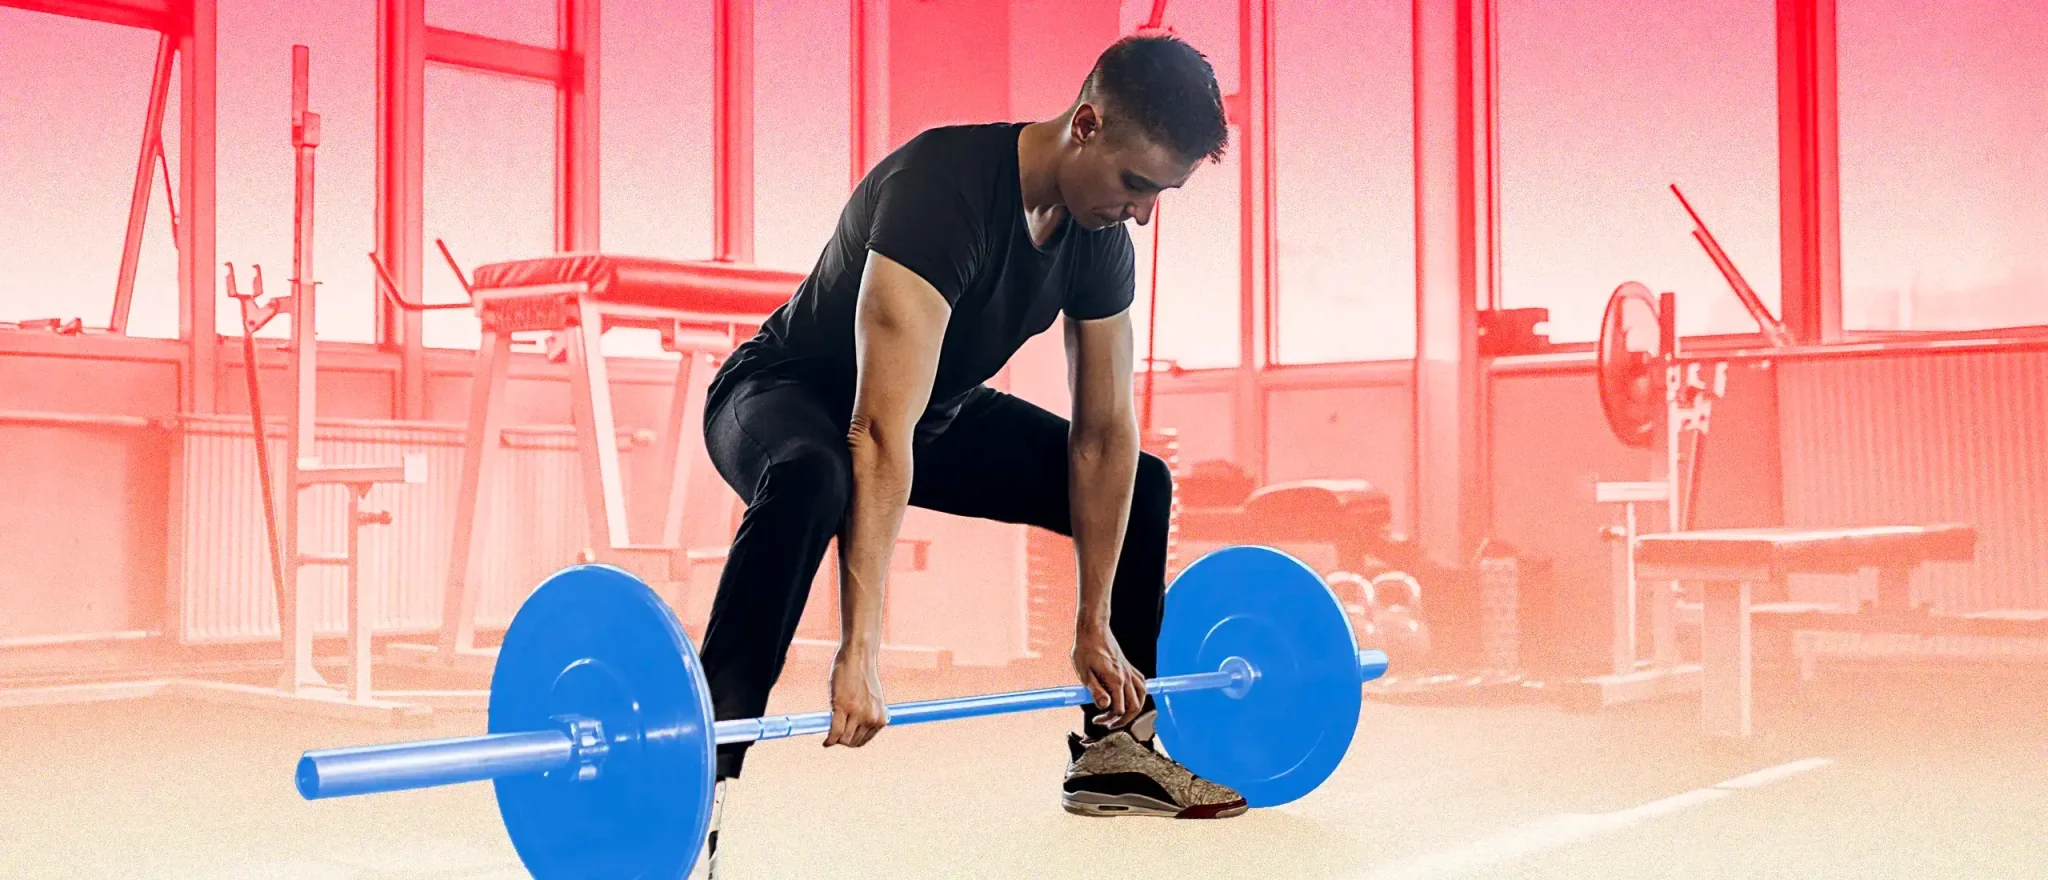 RDL vs. Deadlift: Which Is Better for Your Goals?